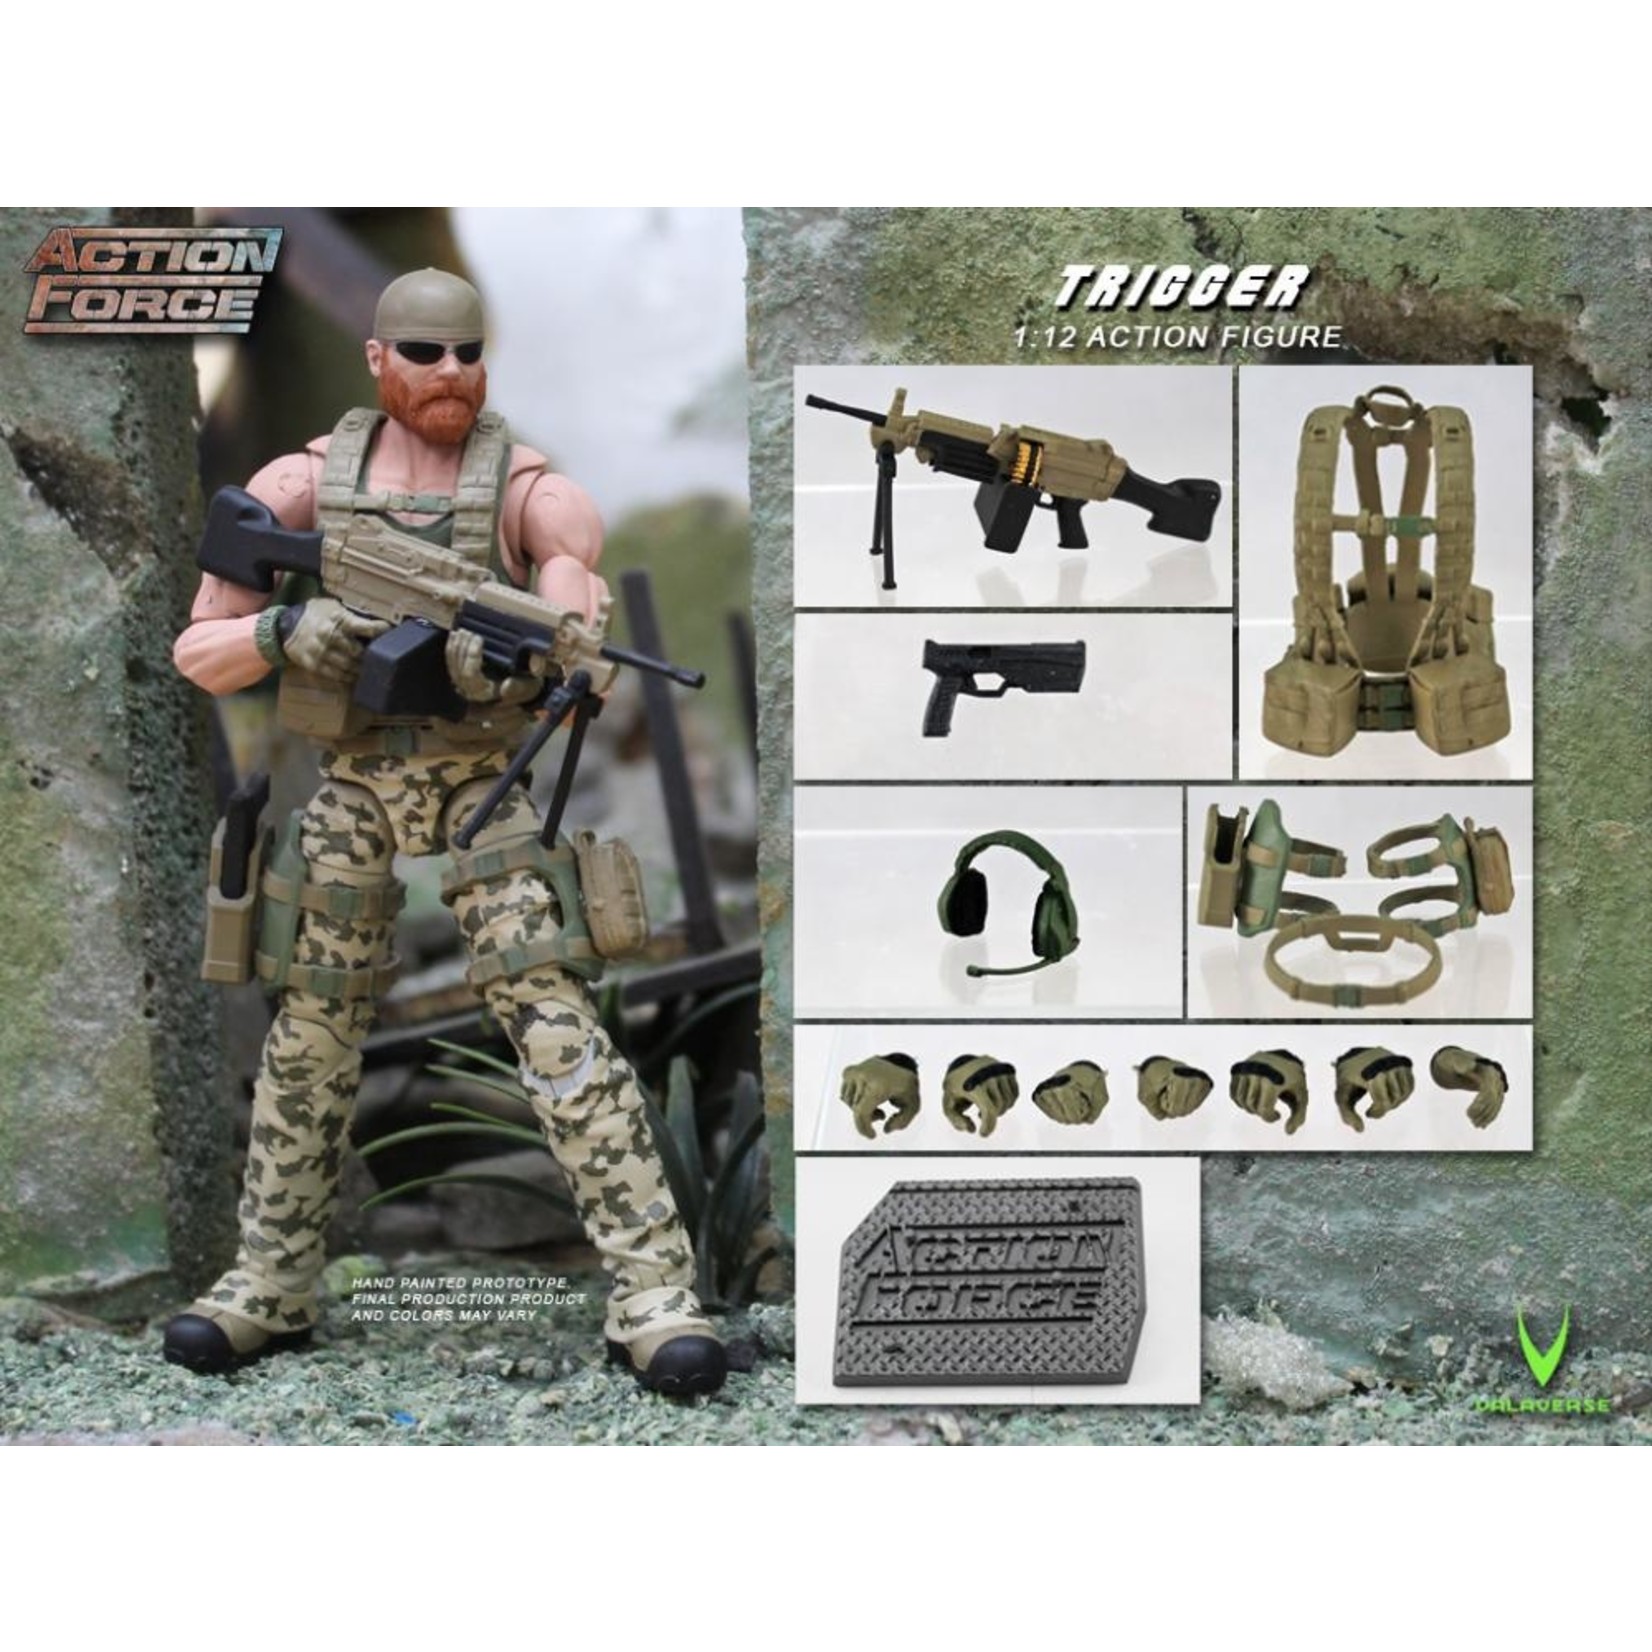 Valaverse Valaverse Action Force Trigger 1/12 Scale Action Figure - Series 2